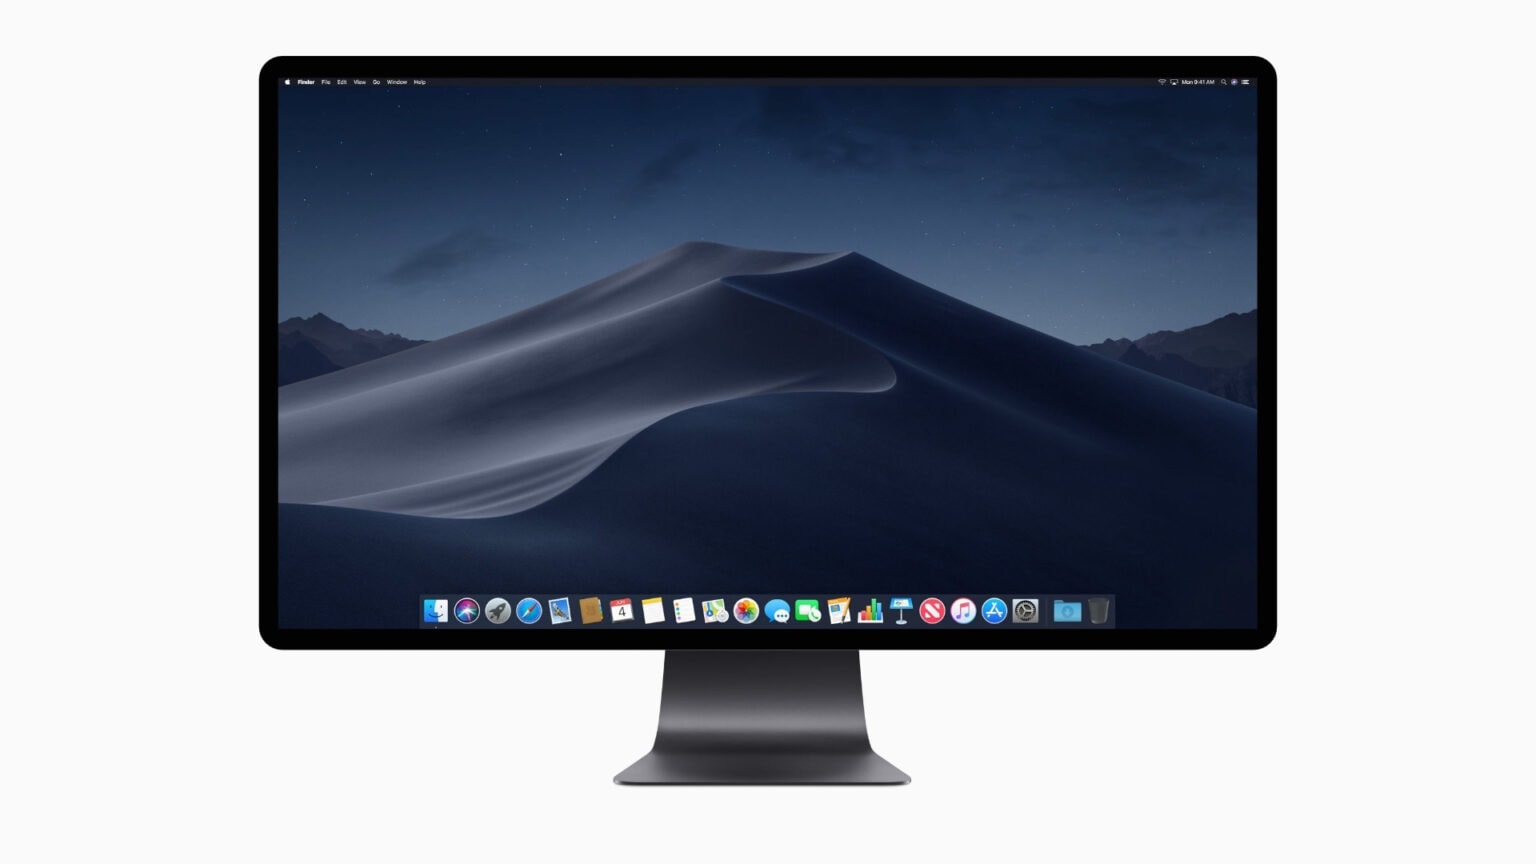 A new 27-inch iMac Pro could look something like this.